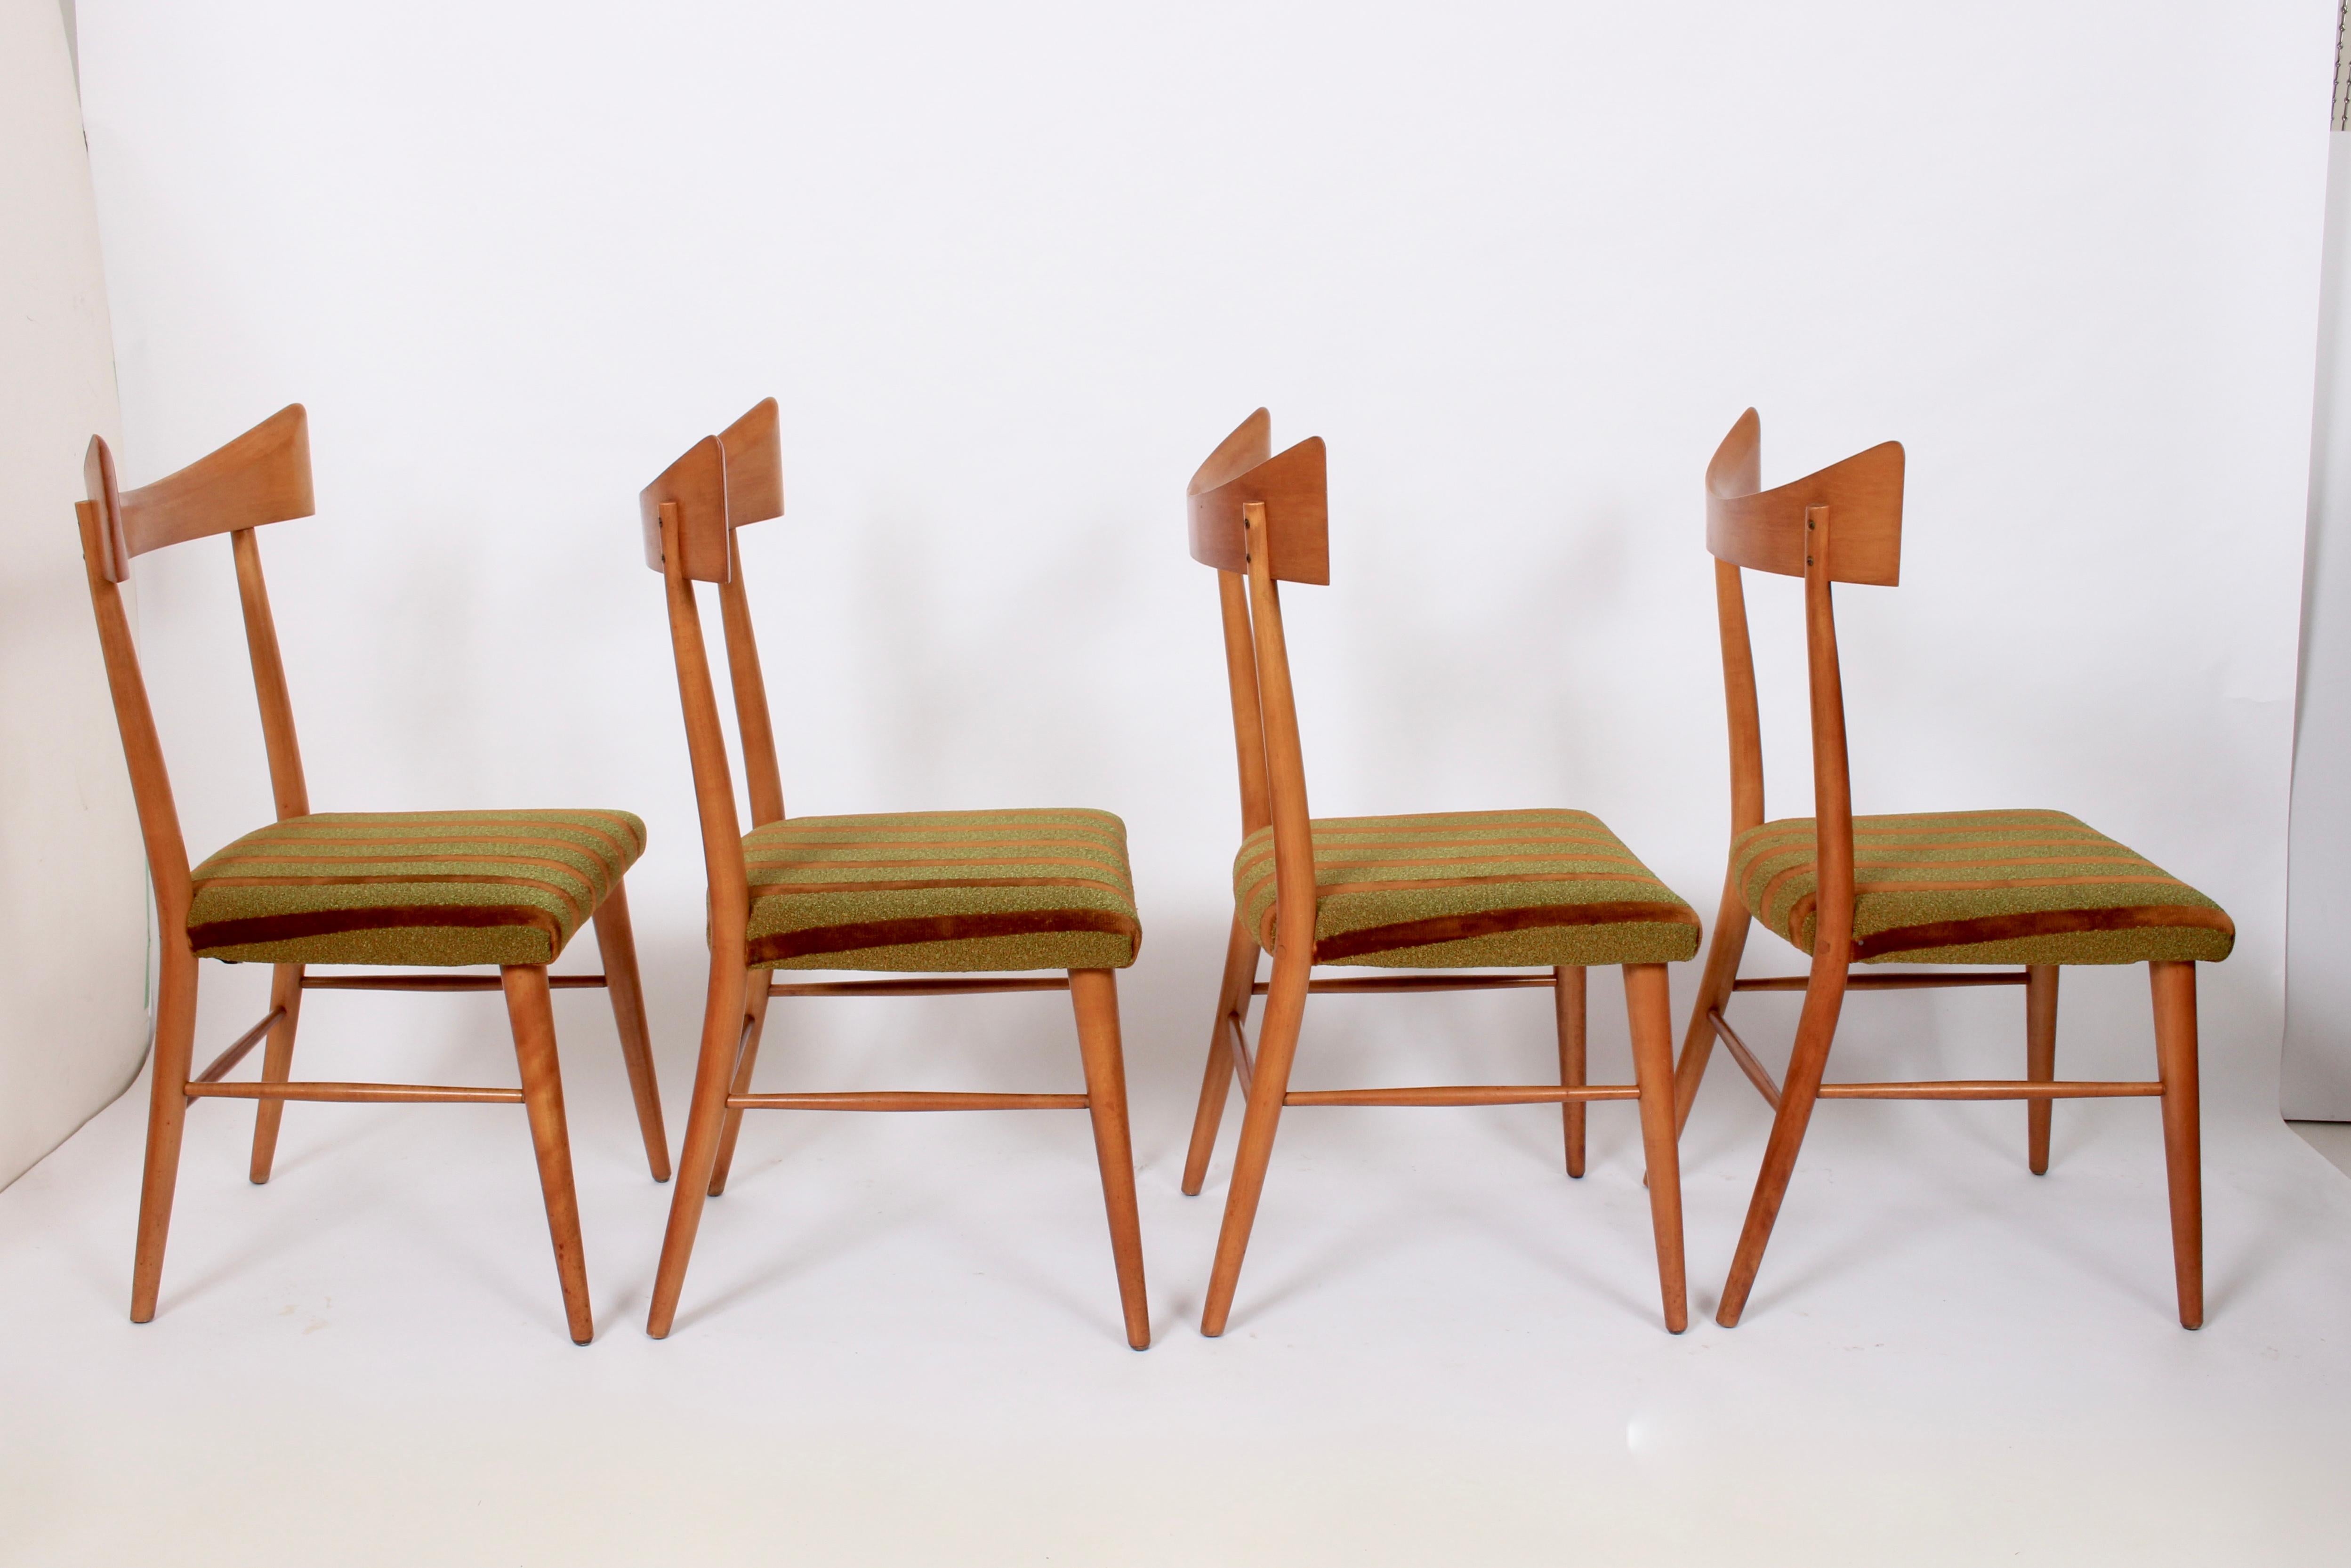 Paul McCobb Planner Group for Winchendon set of four 1534 Maple Side Chairs. Featuring fine American Mid-Century Modern design, graceful lines, comfort and sturdy support. With original finish and period upholstery.  As seen in the 